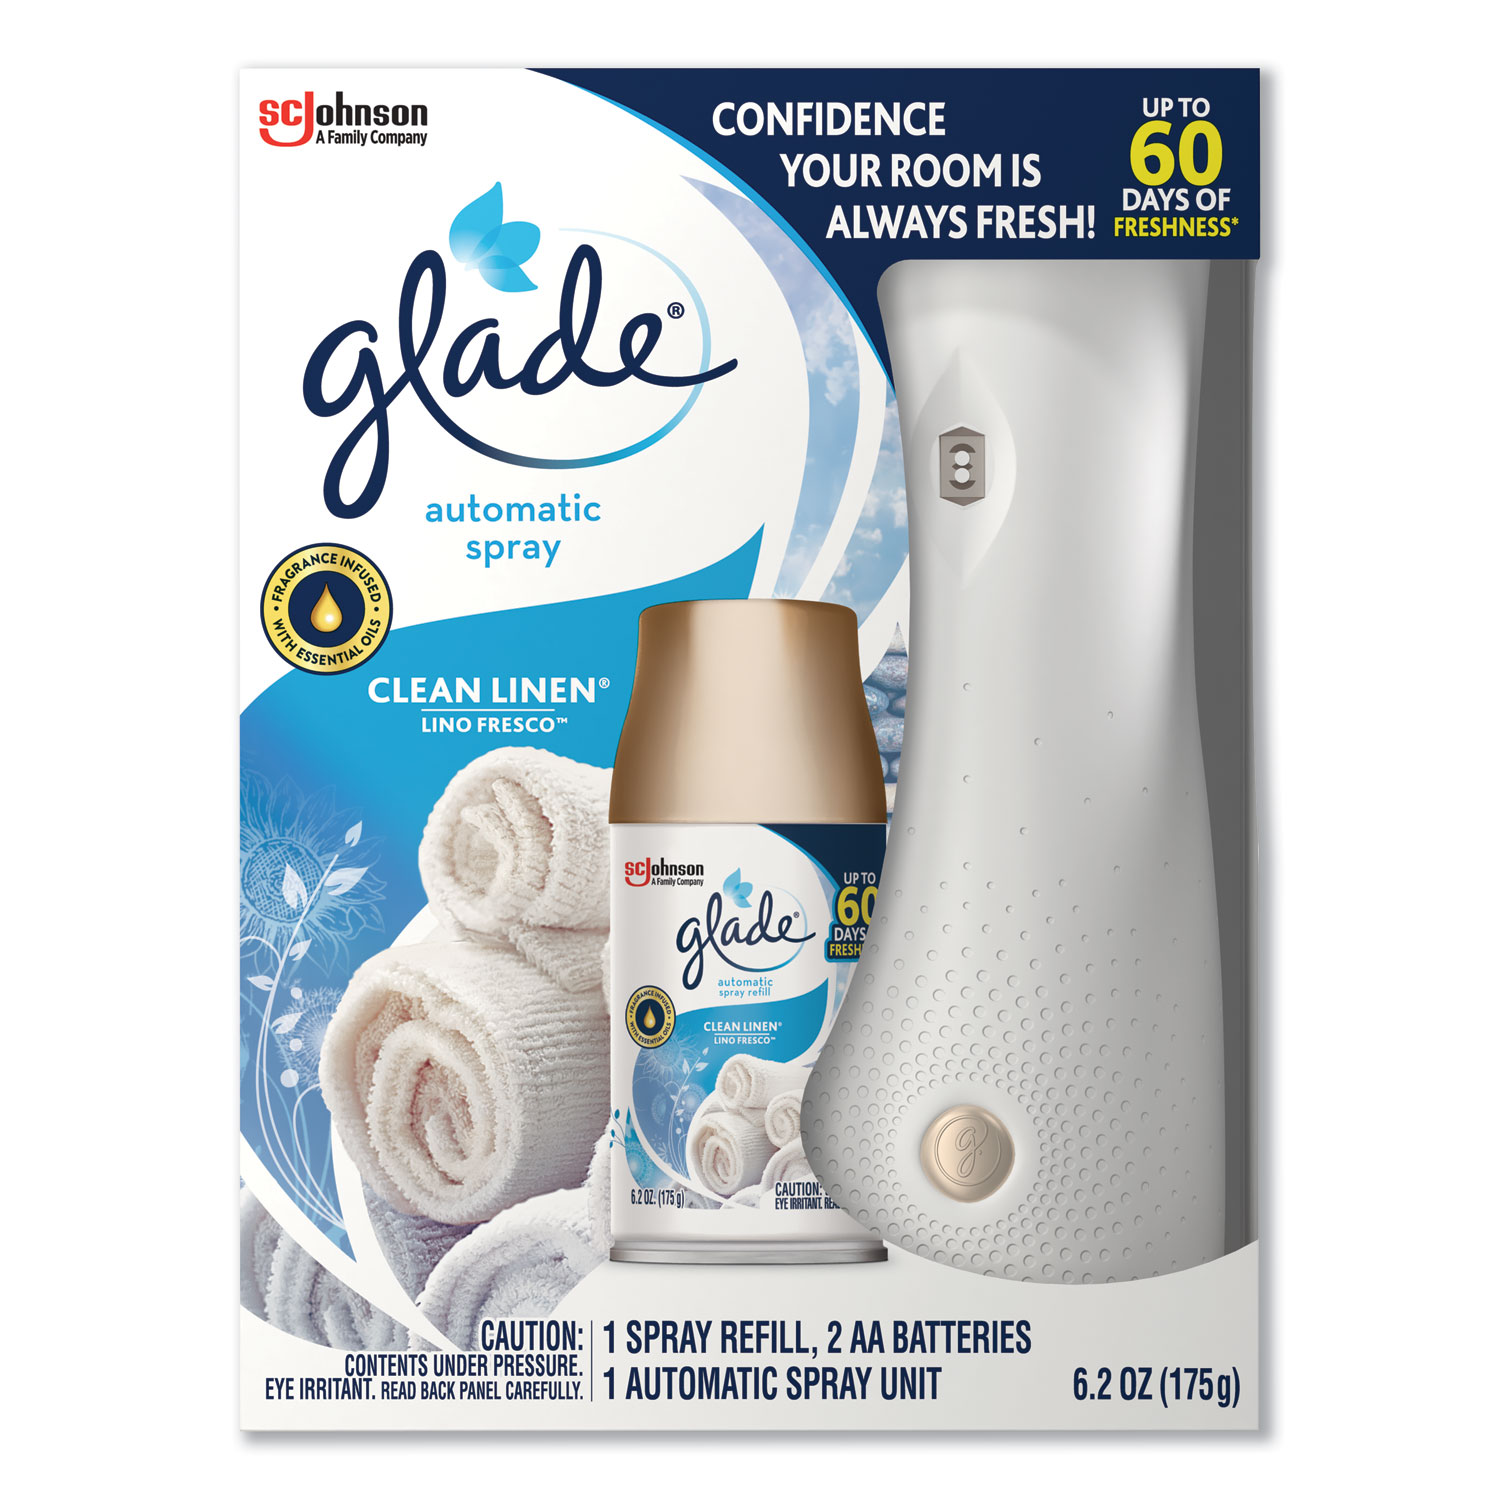  Glade 310916 Automatic Air Freshener Starter Kit, Spray Unit and Refill, Clean Linen, 6.2 oz (SJN310916KT) 